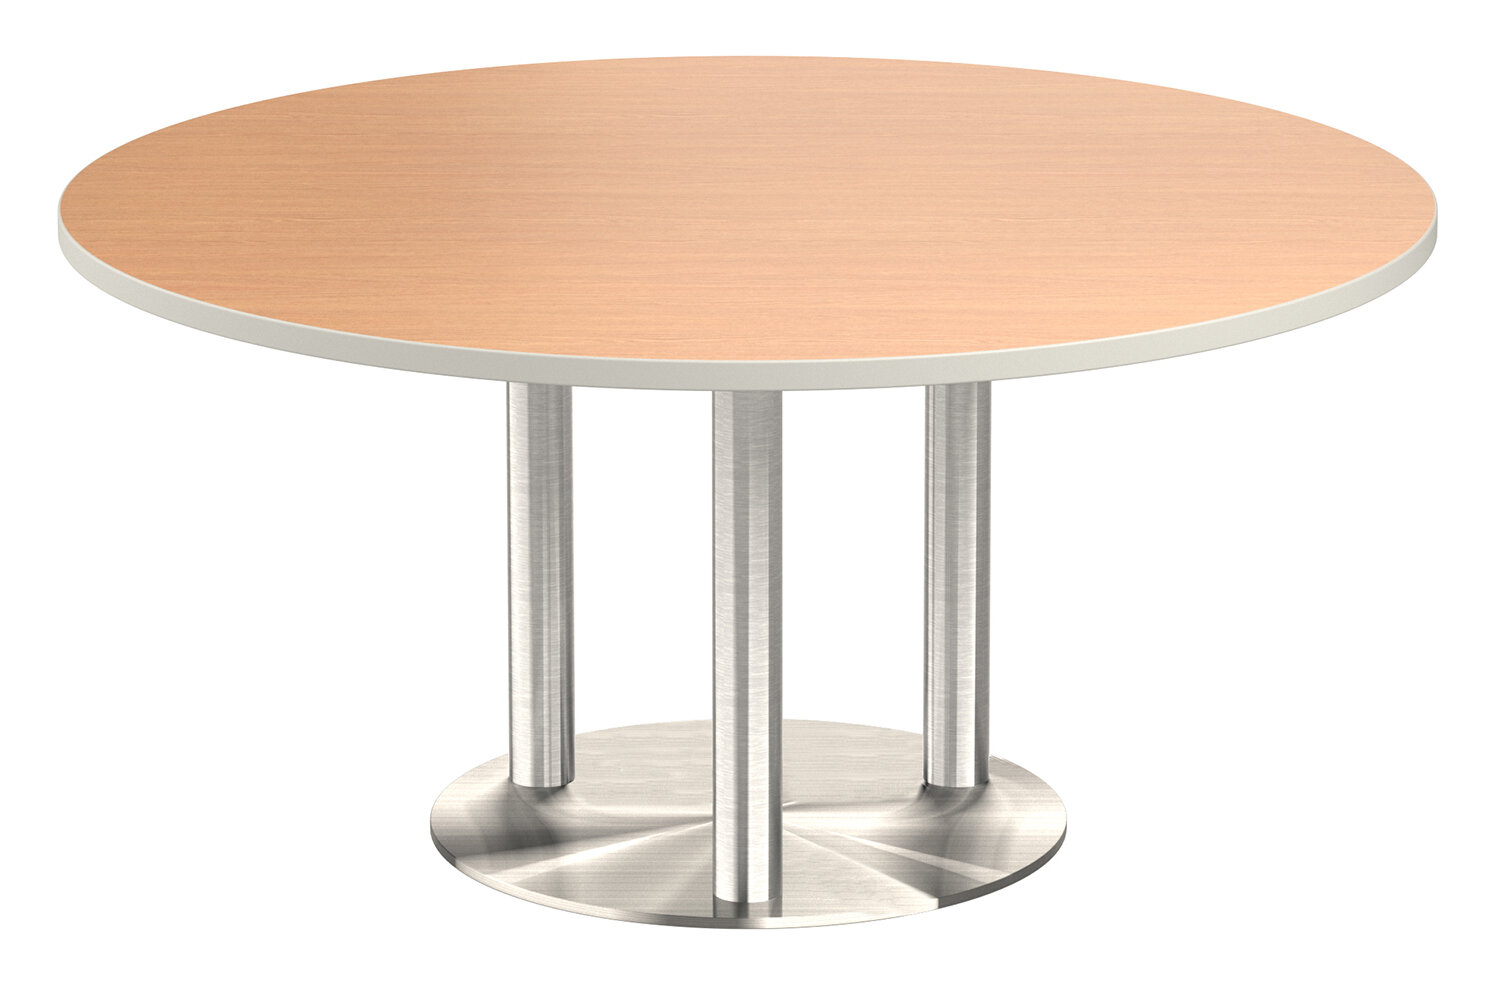 60-diameter-round-cafe-table-with-tribase.jpg